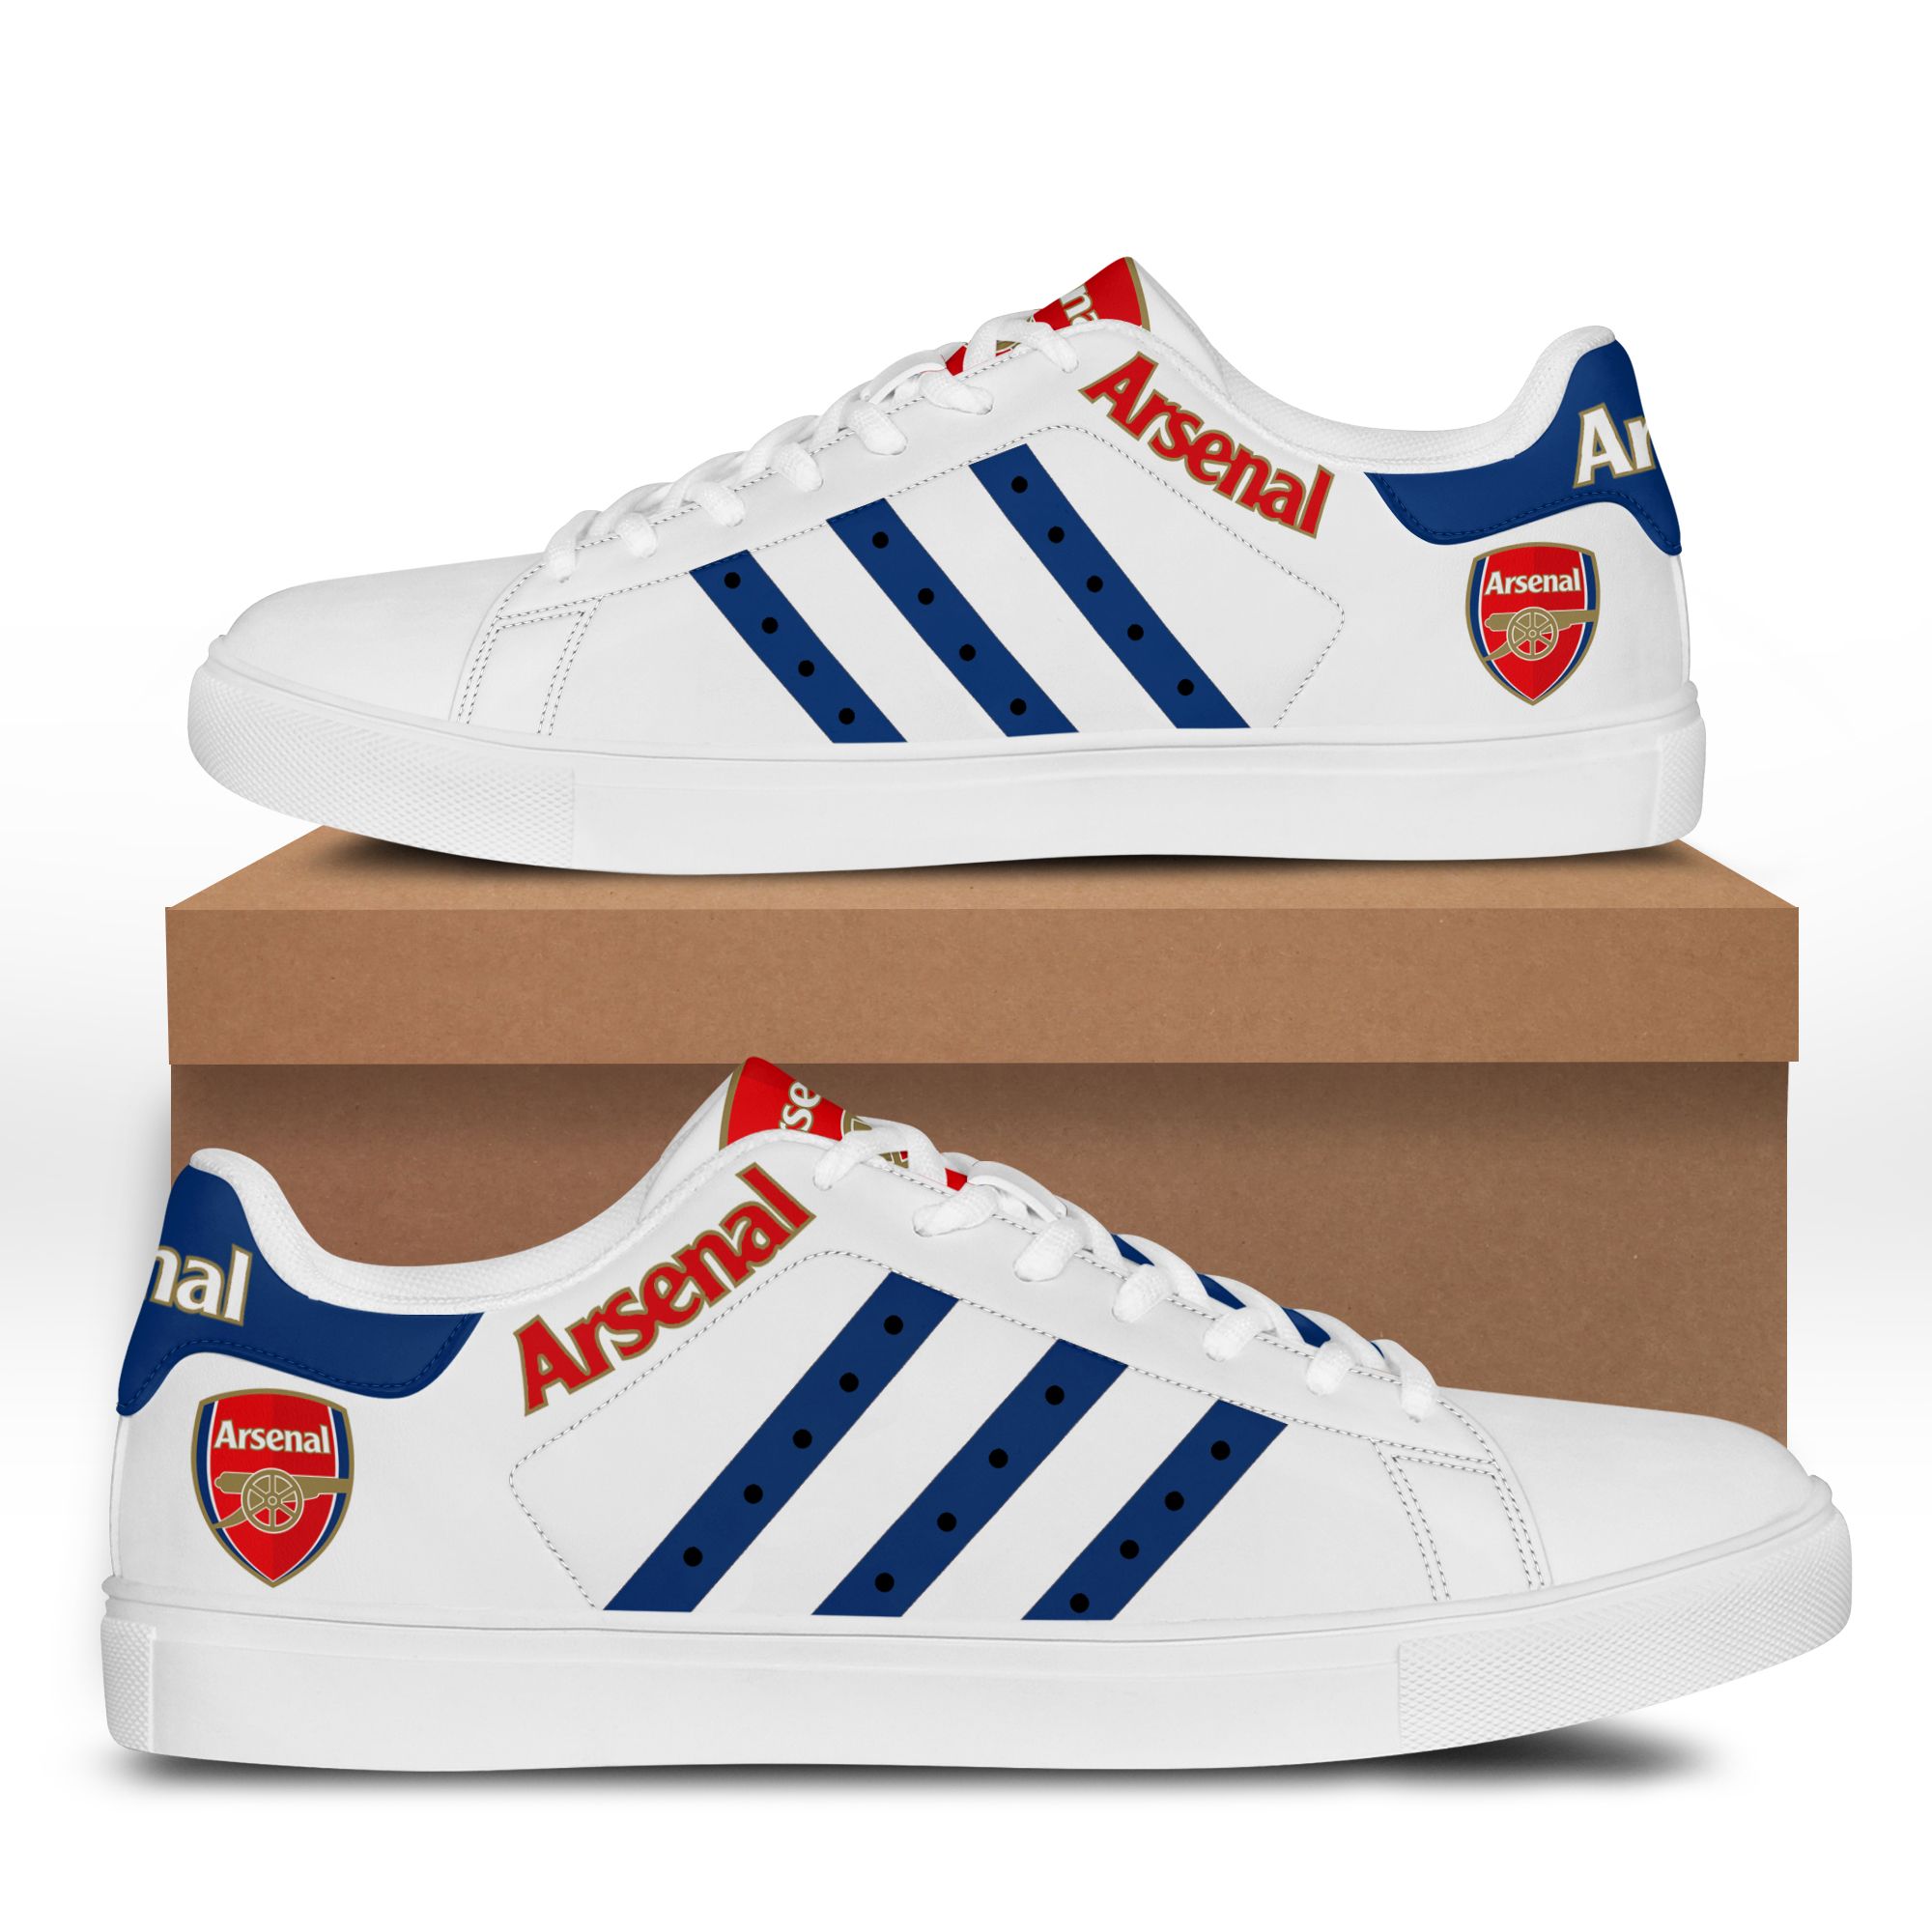 Arsenal stan smith low top shoes – LIMITED EDITION